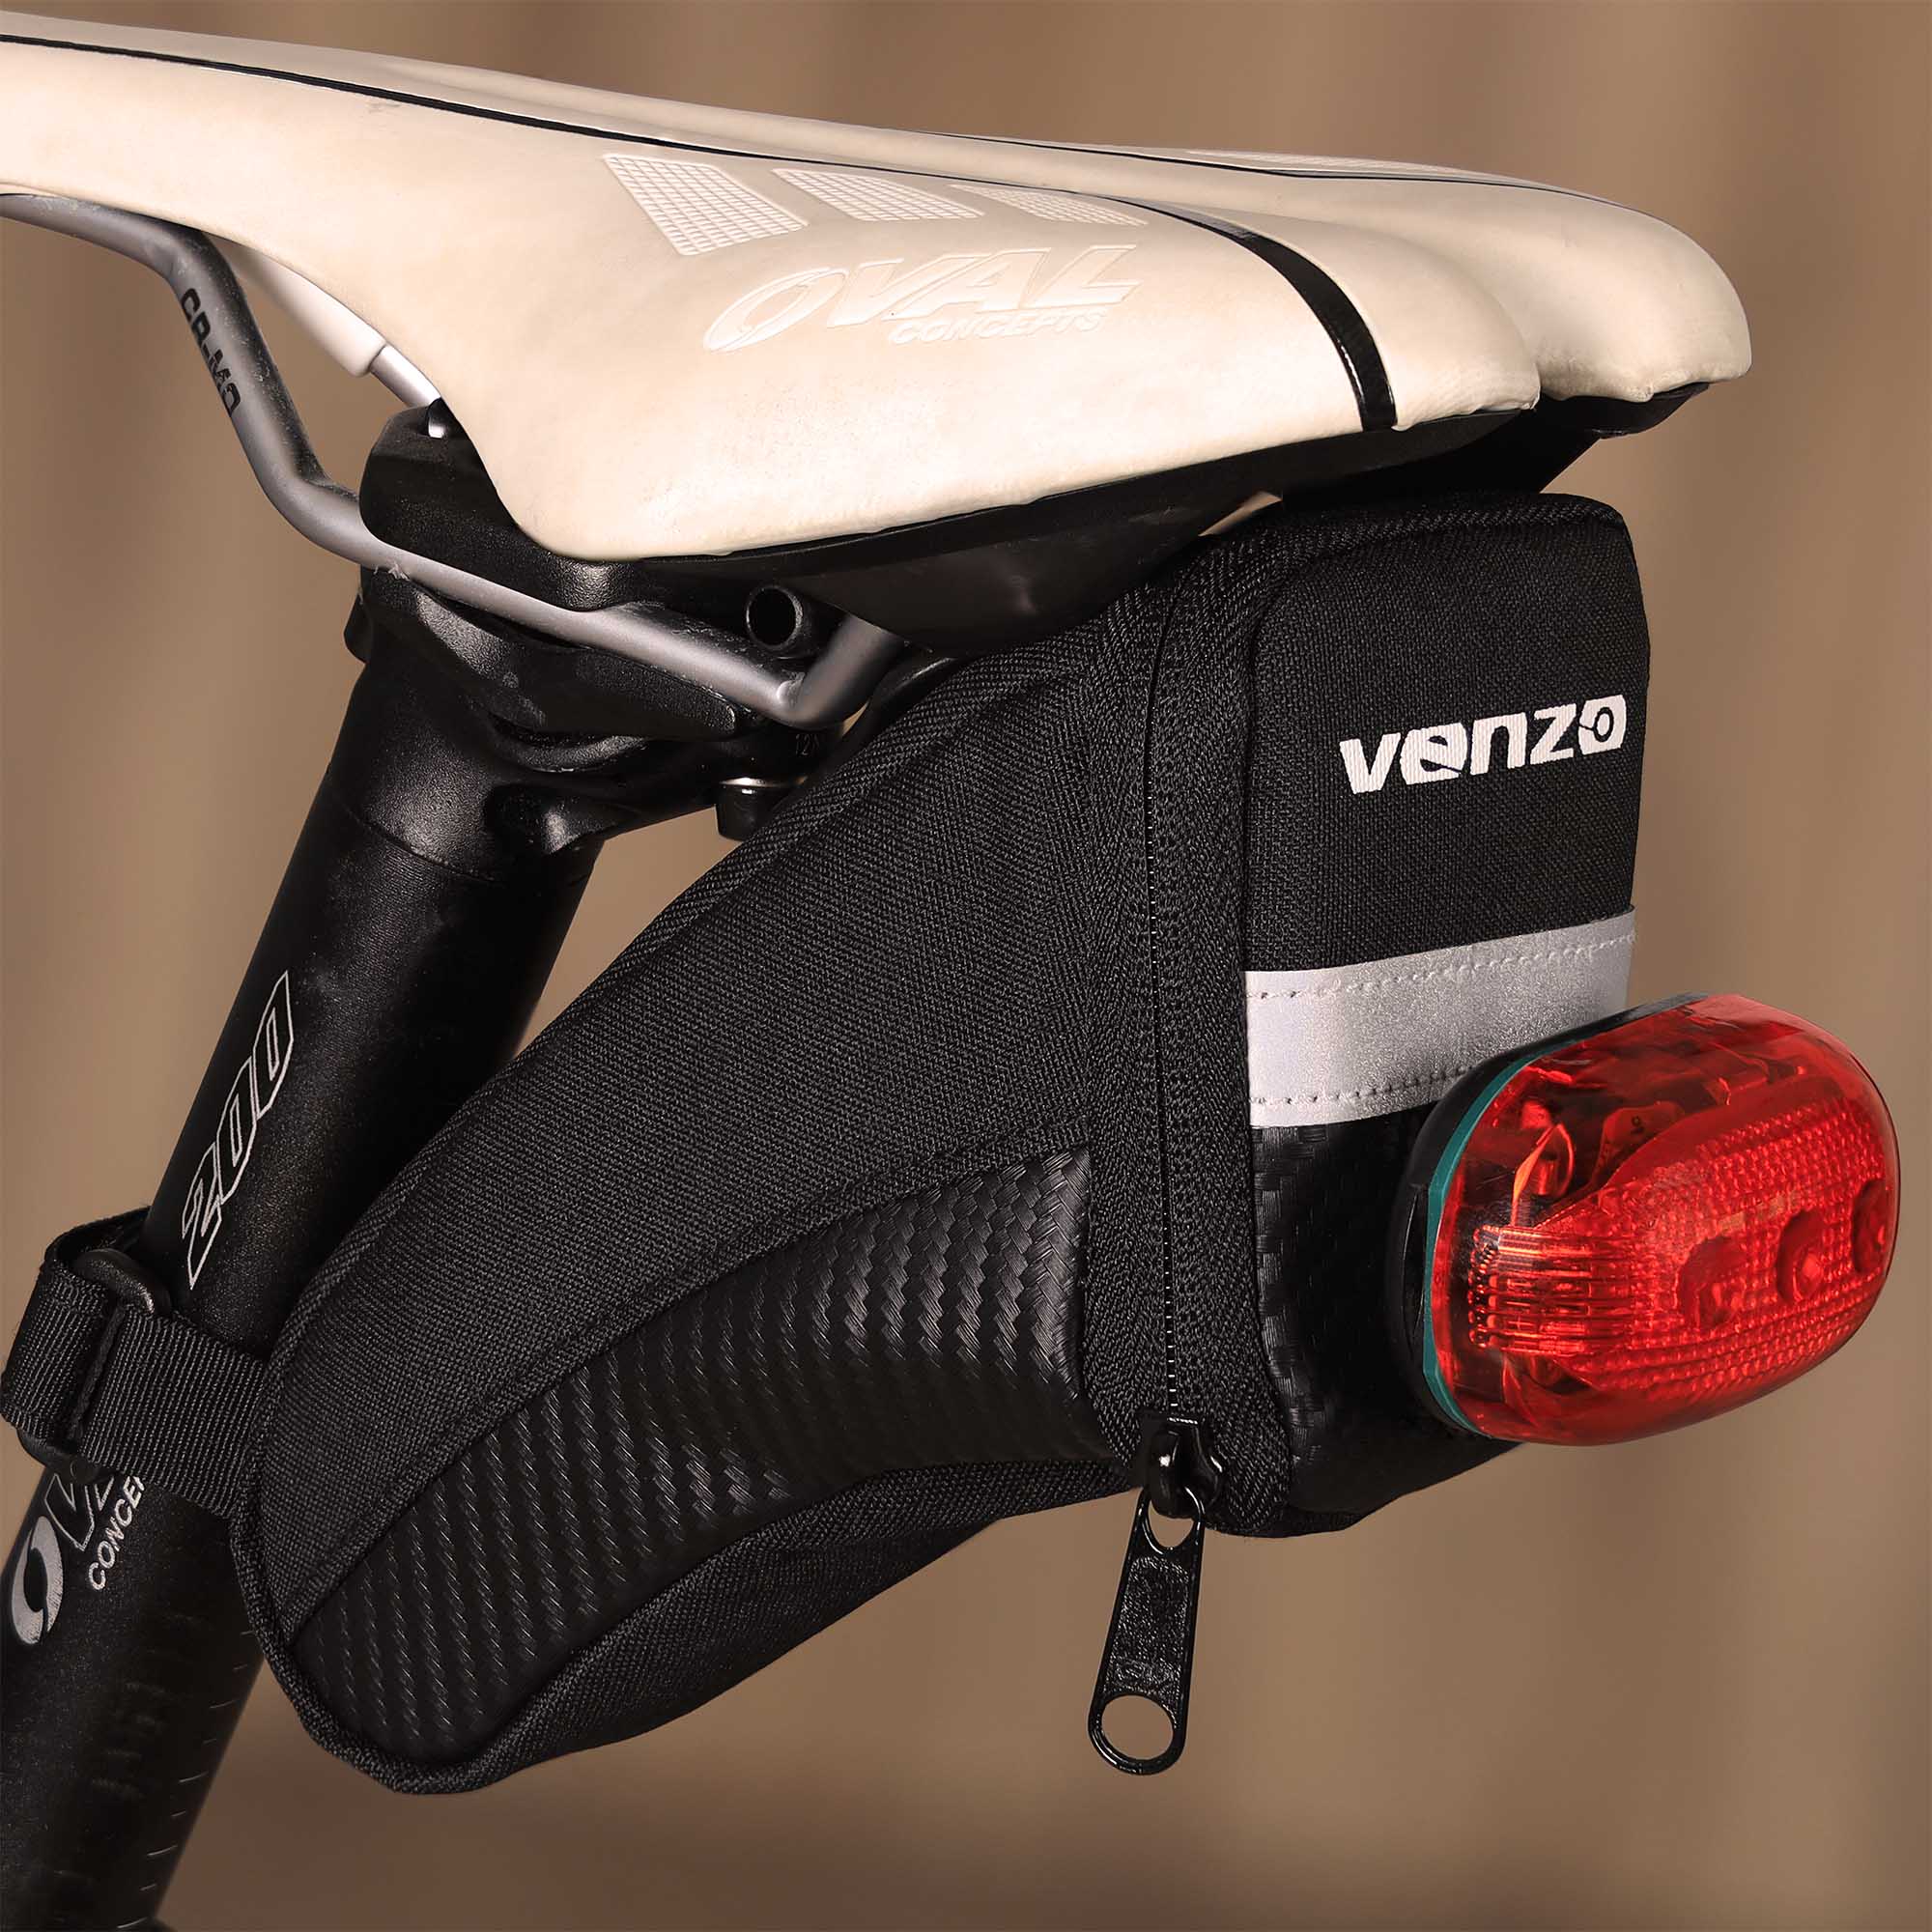 Venzo Road Mountain MTB Bike Bicycle Accessories Polyester Seat Saddle Bag